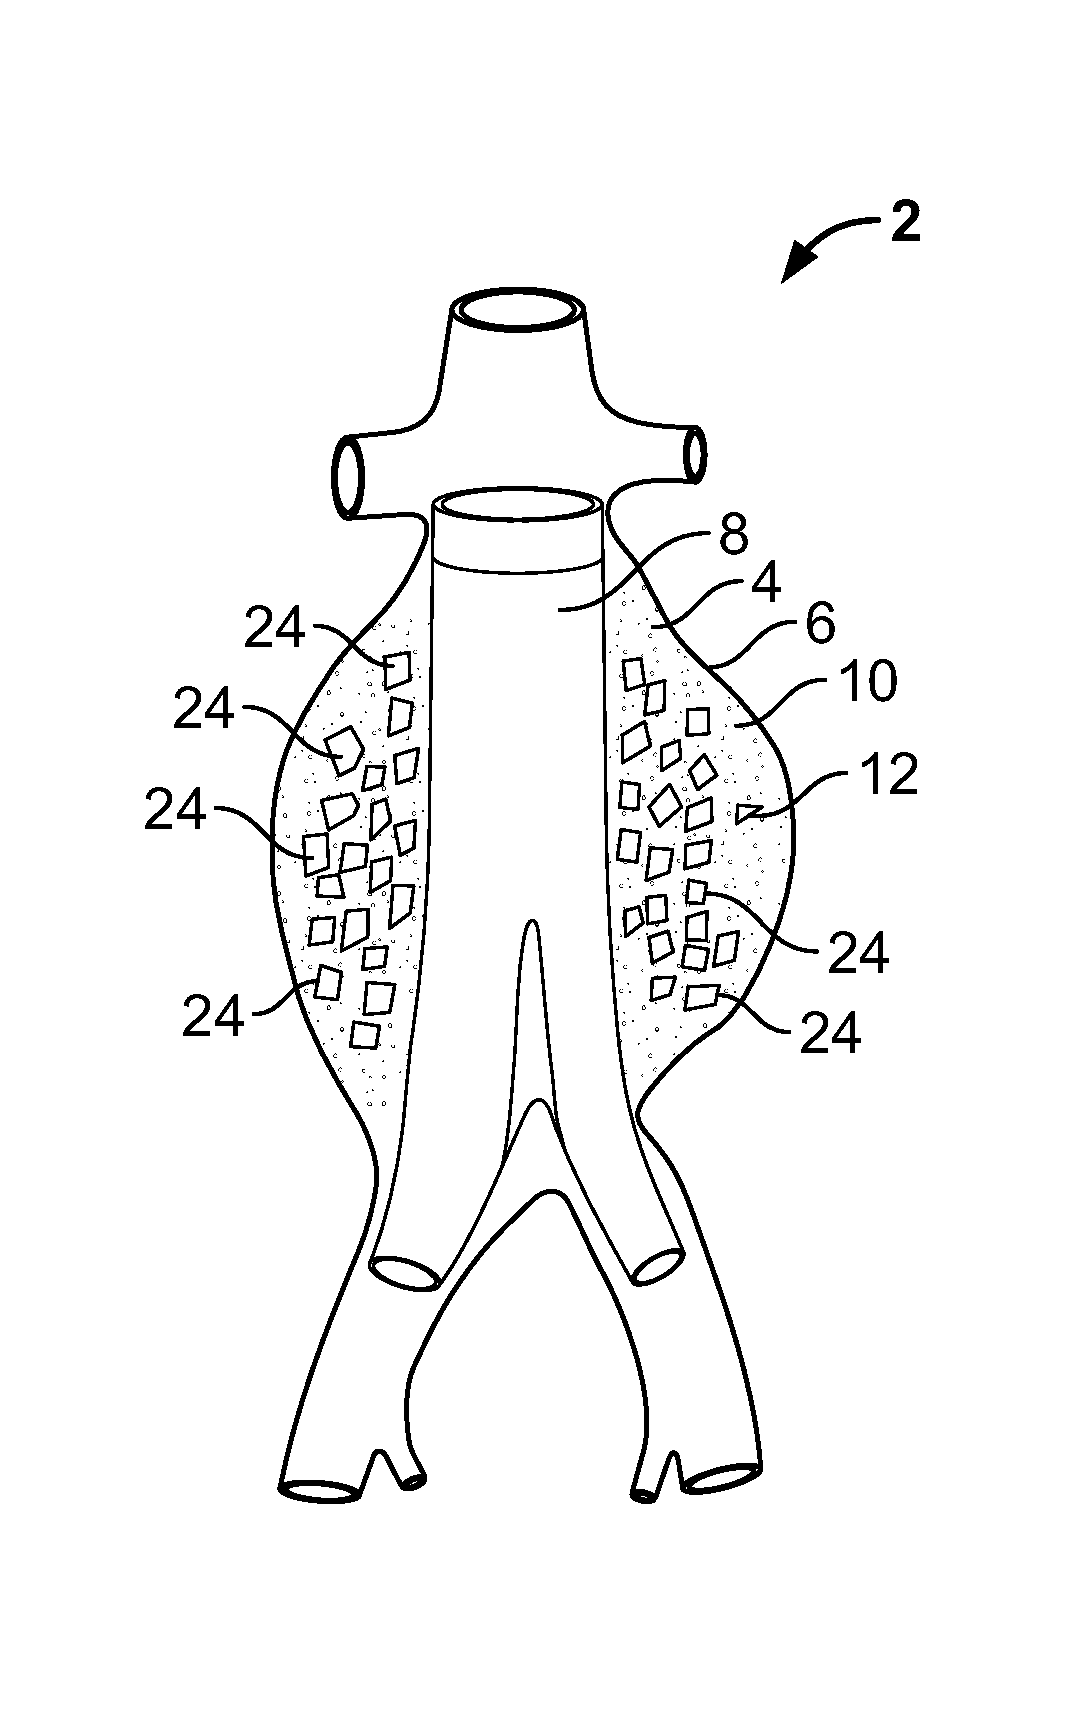 Embolization device and a method of using the same